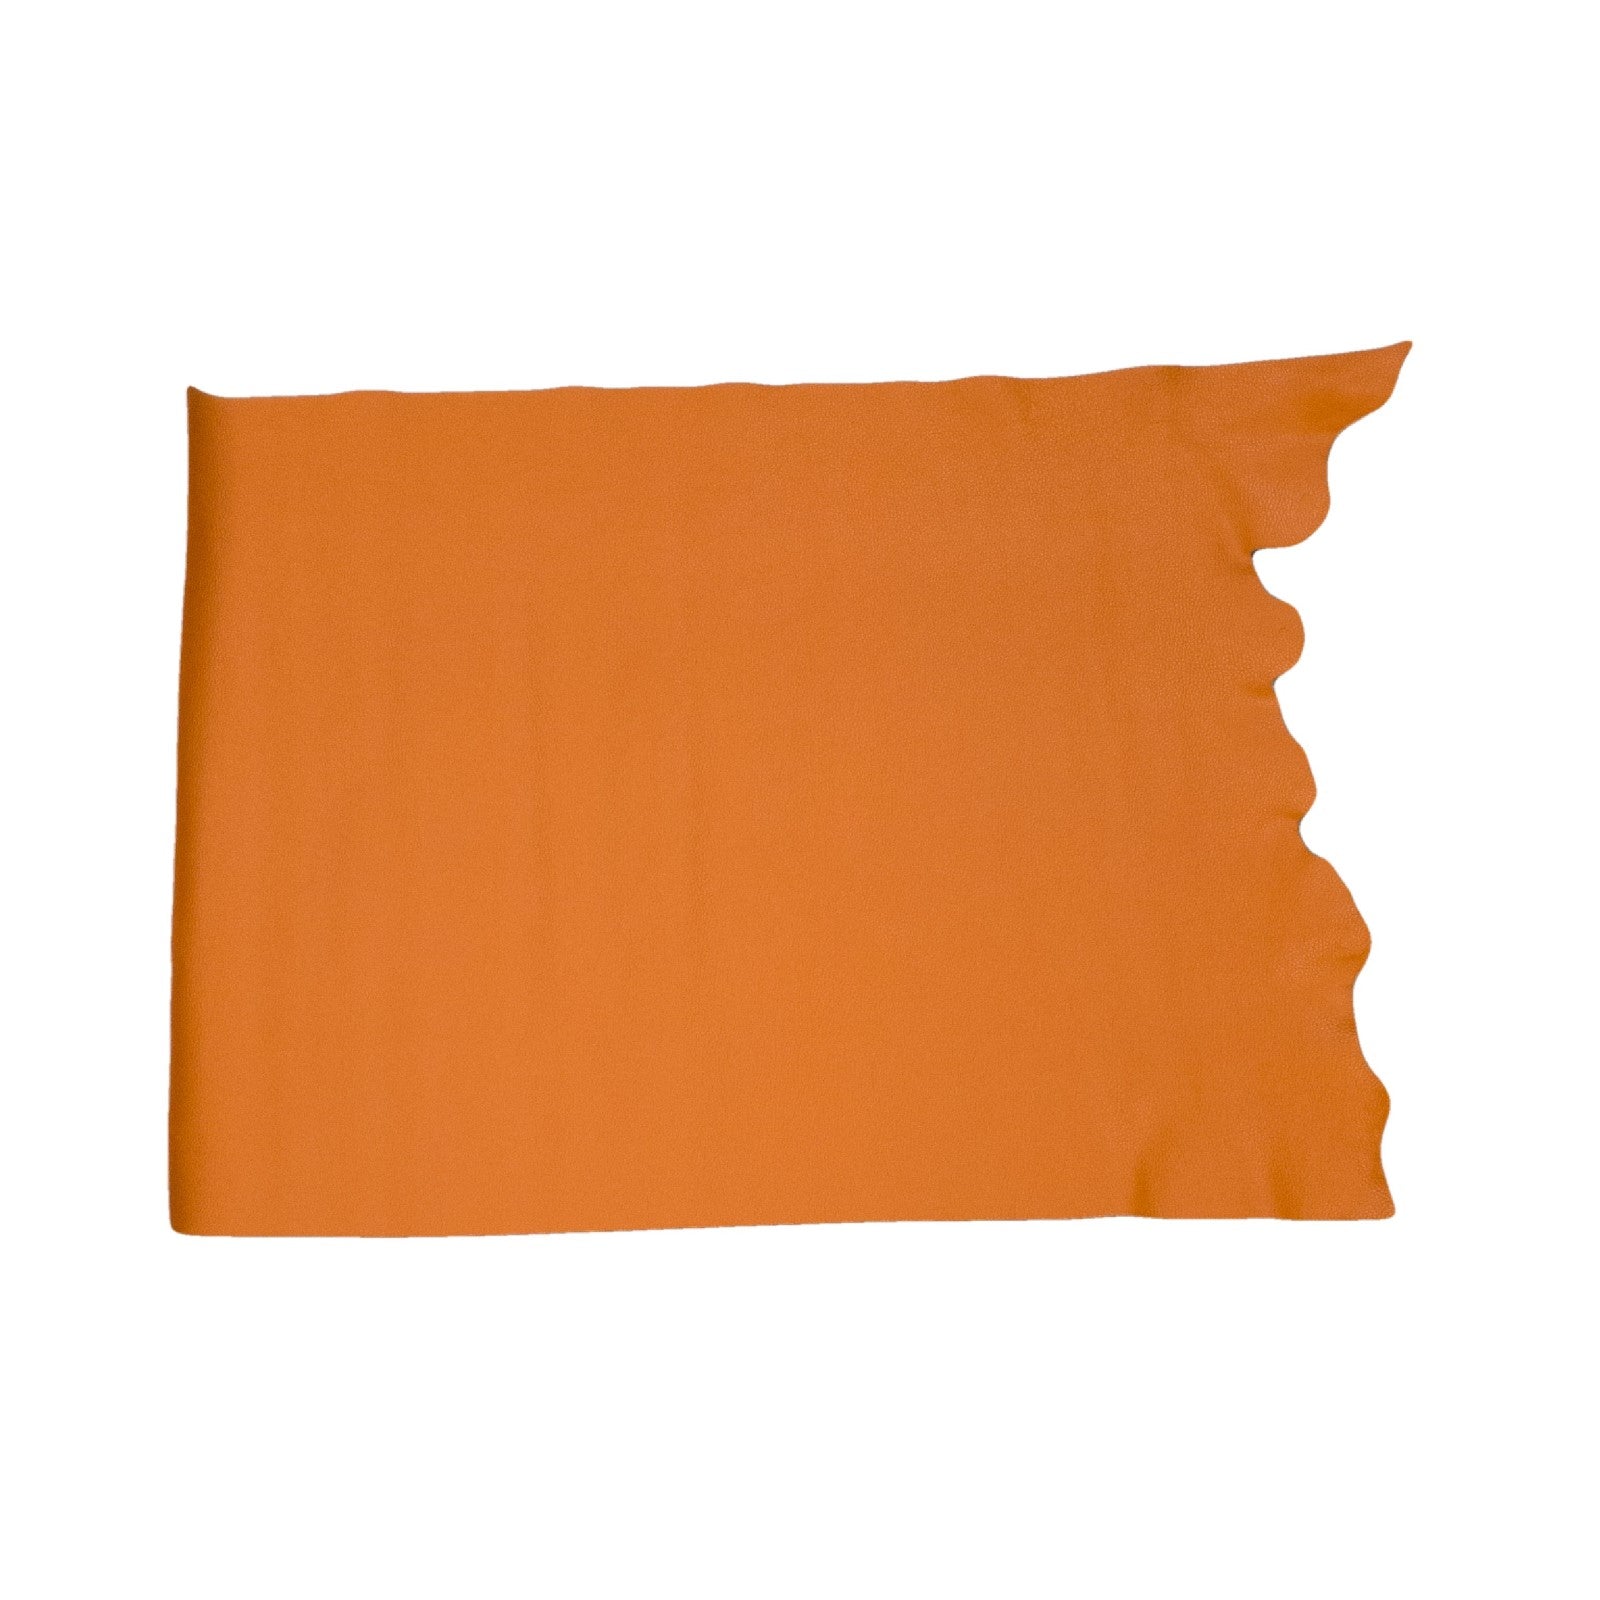 Valencia Orange, 3-4 oz Cow Hides, Tried n True, 6.5-7.5 Square Foot / Project Piece (Middle) | The Leather Guy